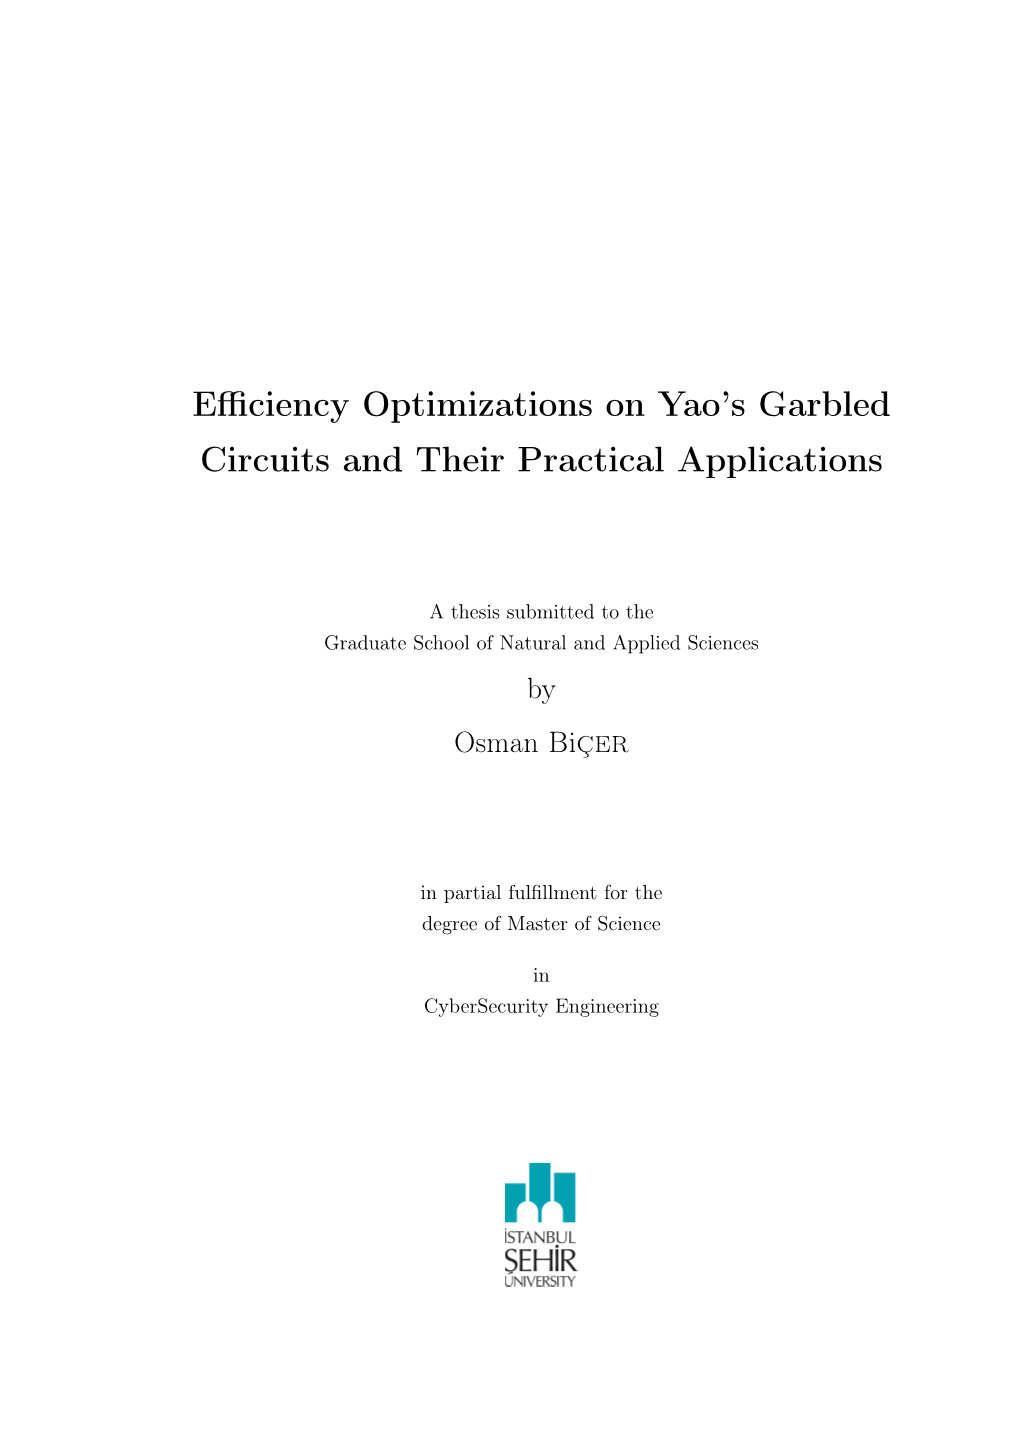 Efficiency Optimizations on Yao's Garbled Circuits and Their Practical Applications